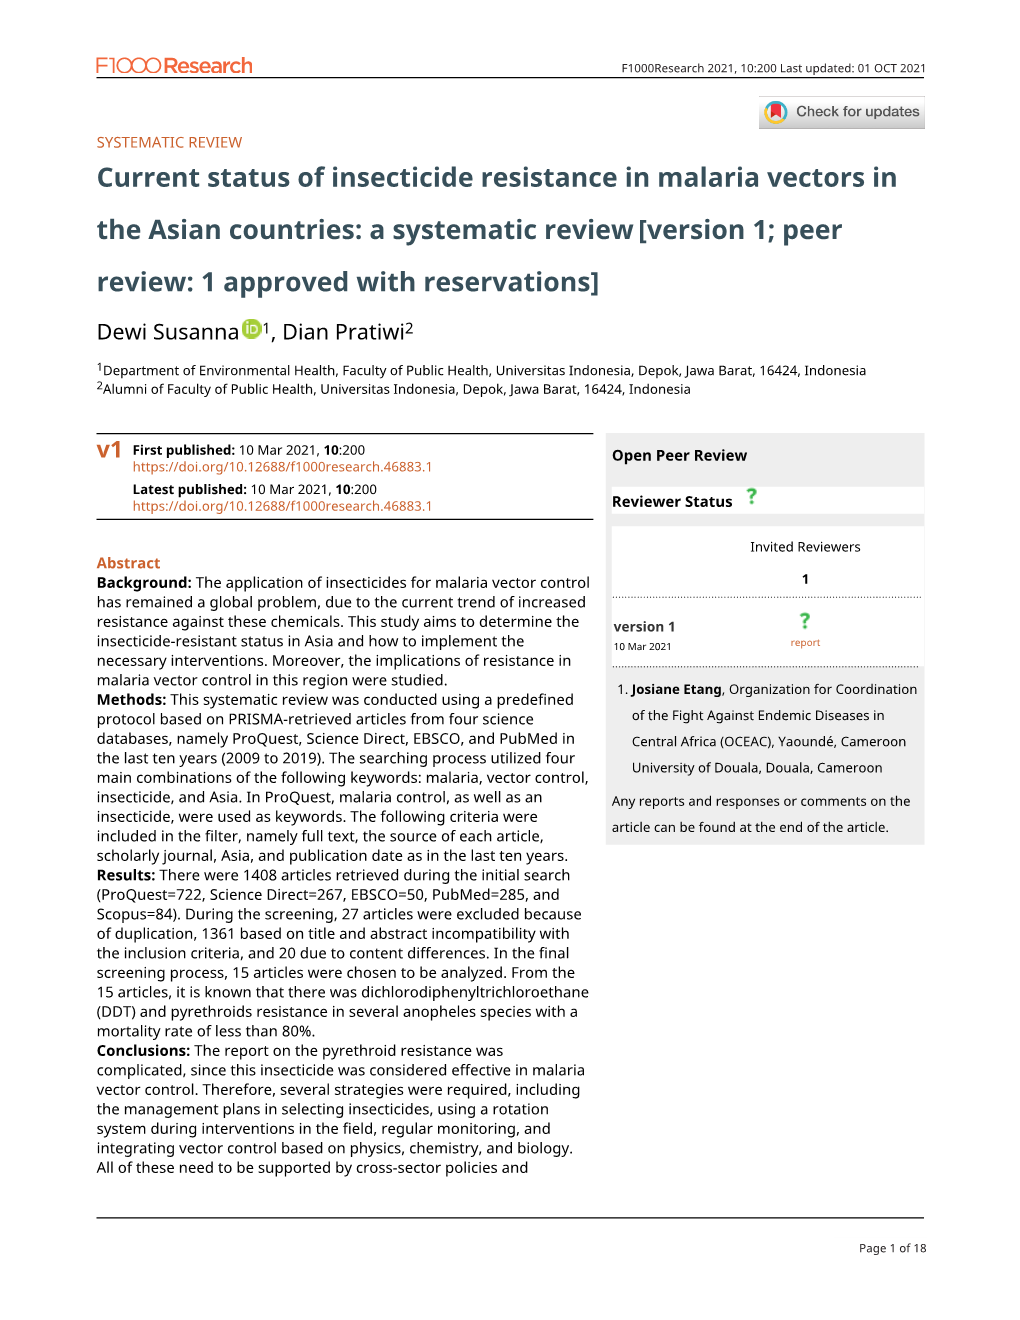 Current Status of Insecticide Resistance in Malaria Vectors in the Asian Countries: a Systematic Review [Version 1; Peer Review: 1 Approved with Reservations]